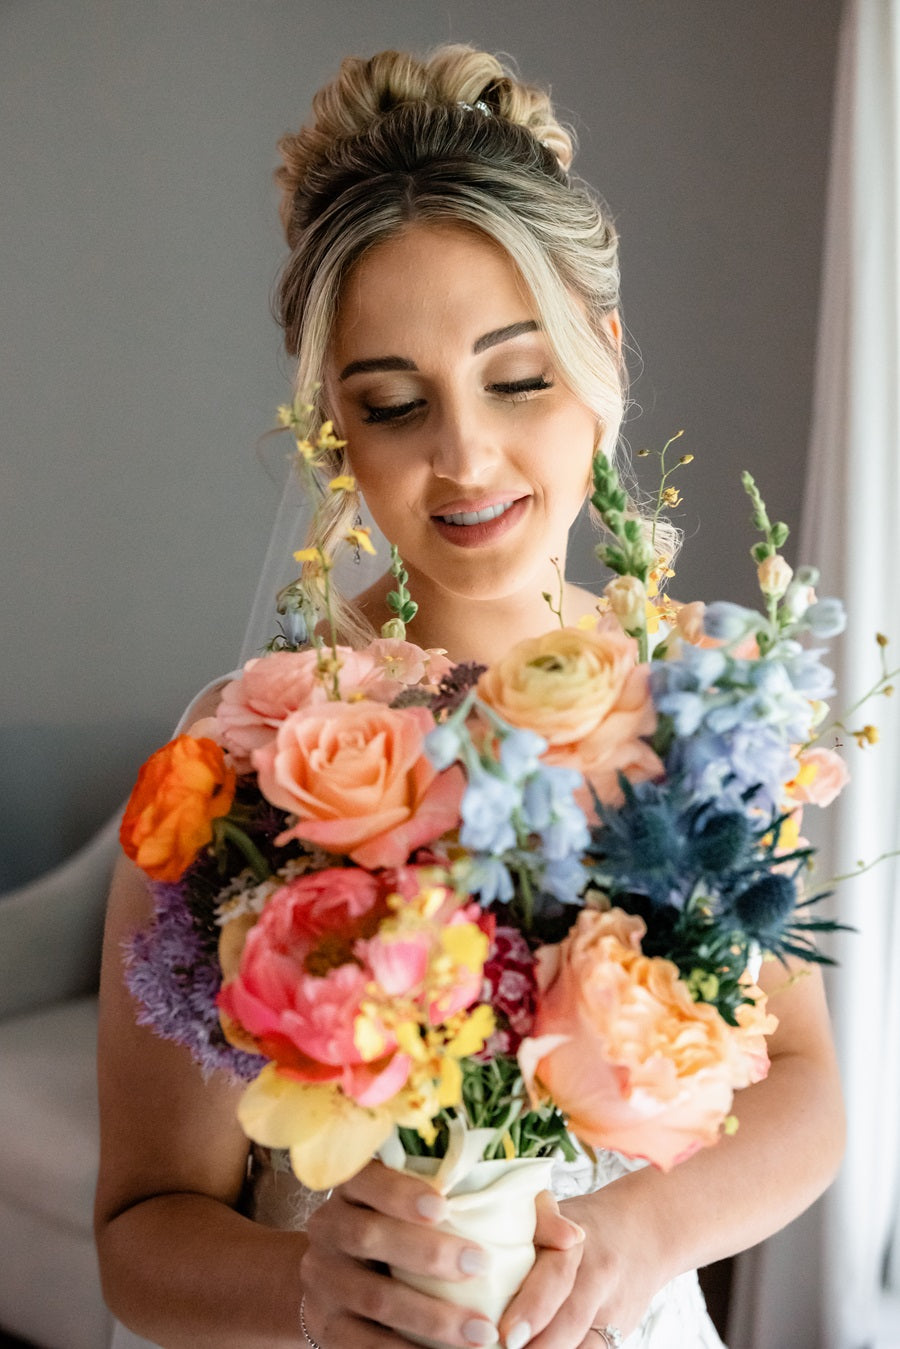 Bride holds up colorful bridal bouquet full of purple, pink, orange, blue, and yellow. Some of the florals pictured are roses, delphinium, and blue thistle.